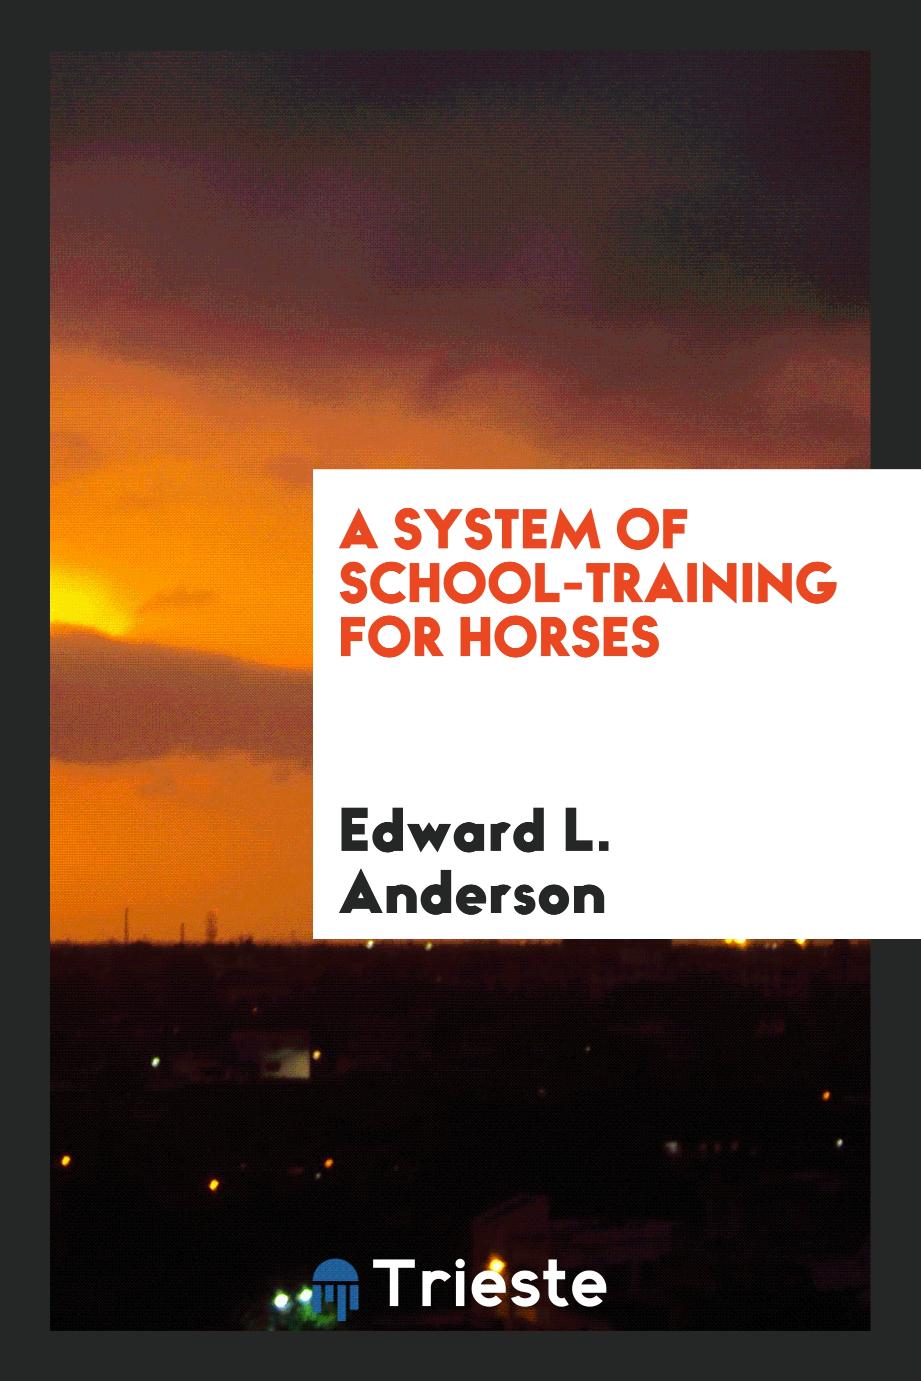 A system of school-training for horses